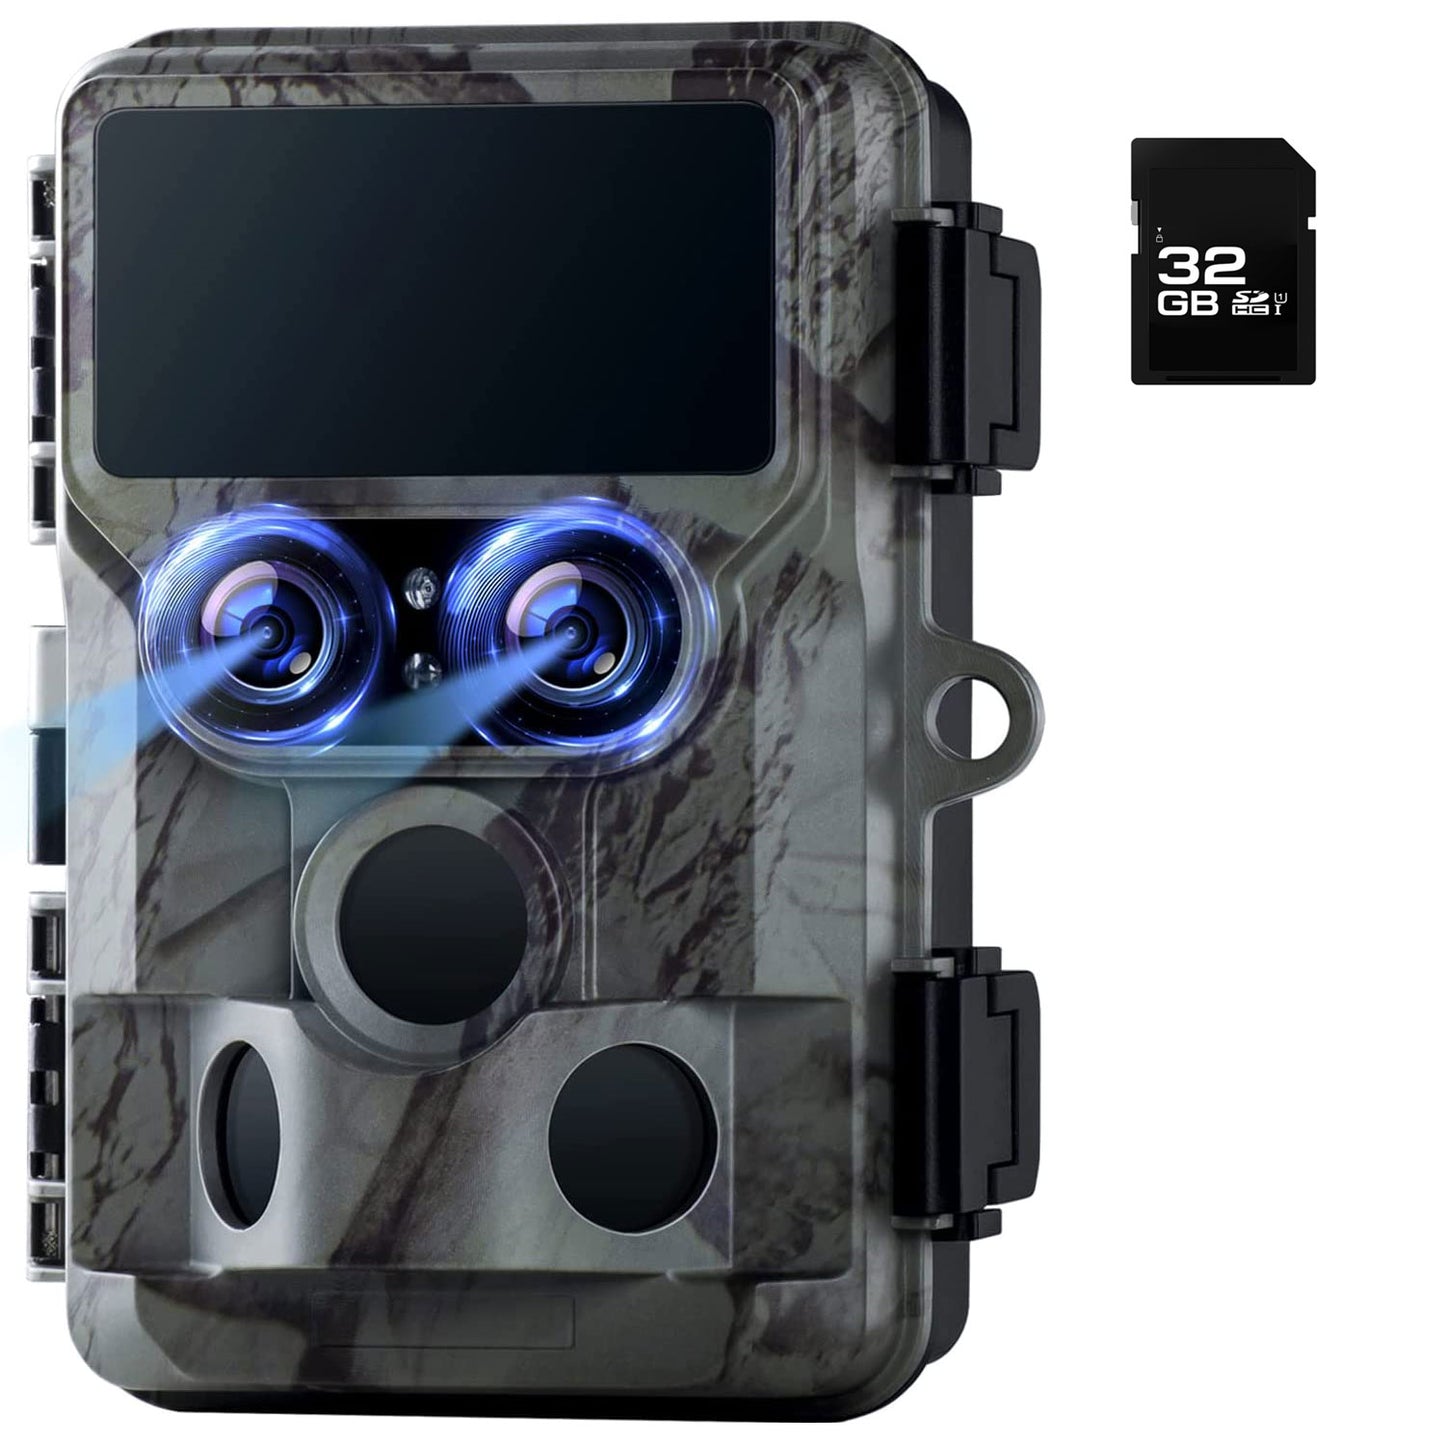 CAMPARK Trail Camera Native 4K 30FPS Starlight Night Vision Dual Lens 60MP WiFi Bluetooth Game Camera with 0.1s Trigger Sony IMX458 Sensors Hunting Trail Cam with SD Card for Wildlife Monitoring